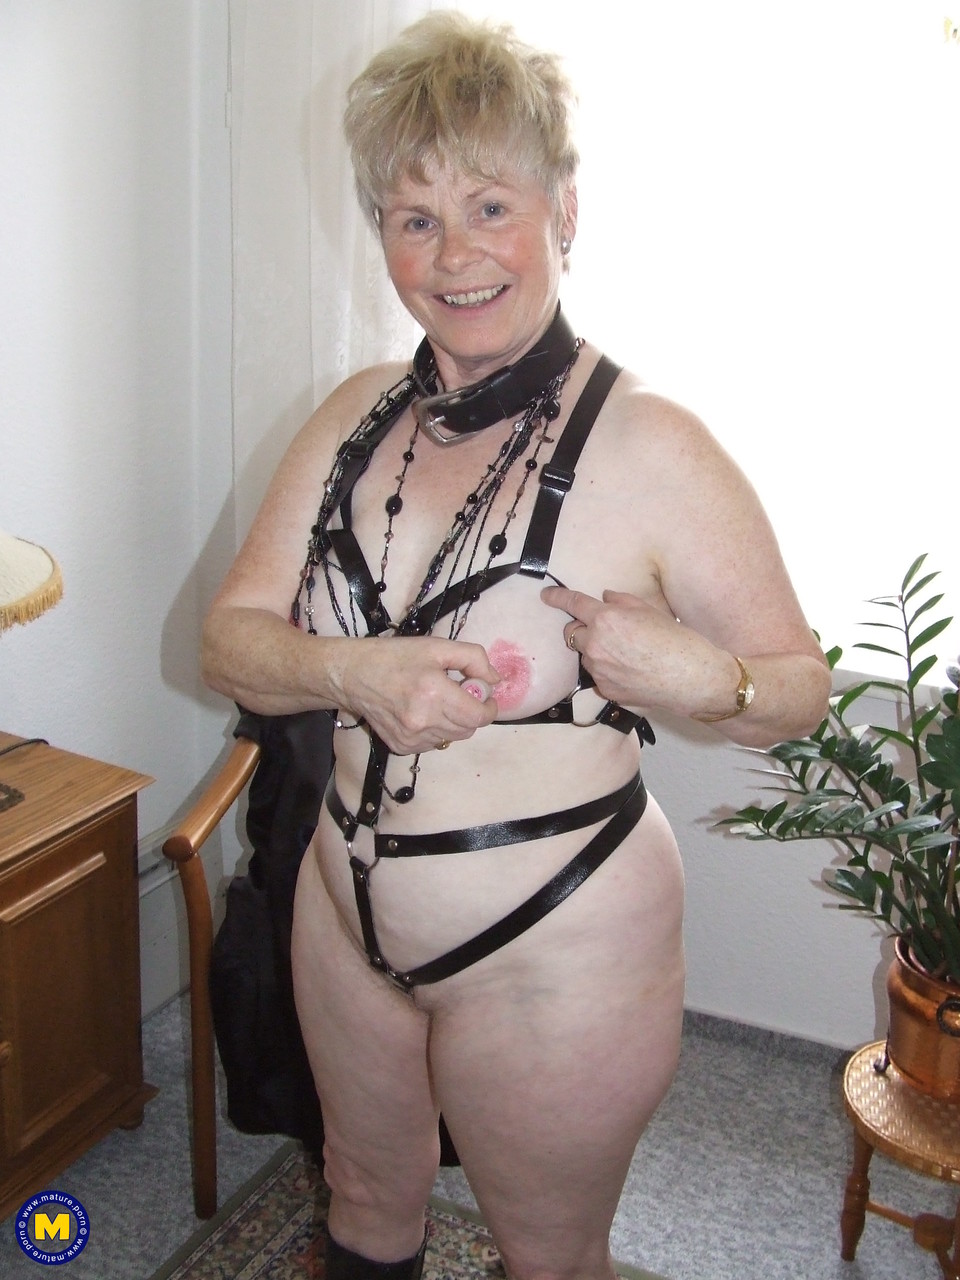 Older BBW with short spiky hair takes off lingerie and fetish gear to go nude 色情照片 #423878676 | Mature NL Pics, Petra, Granny, 手机色情